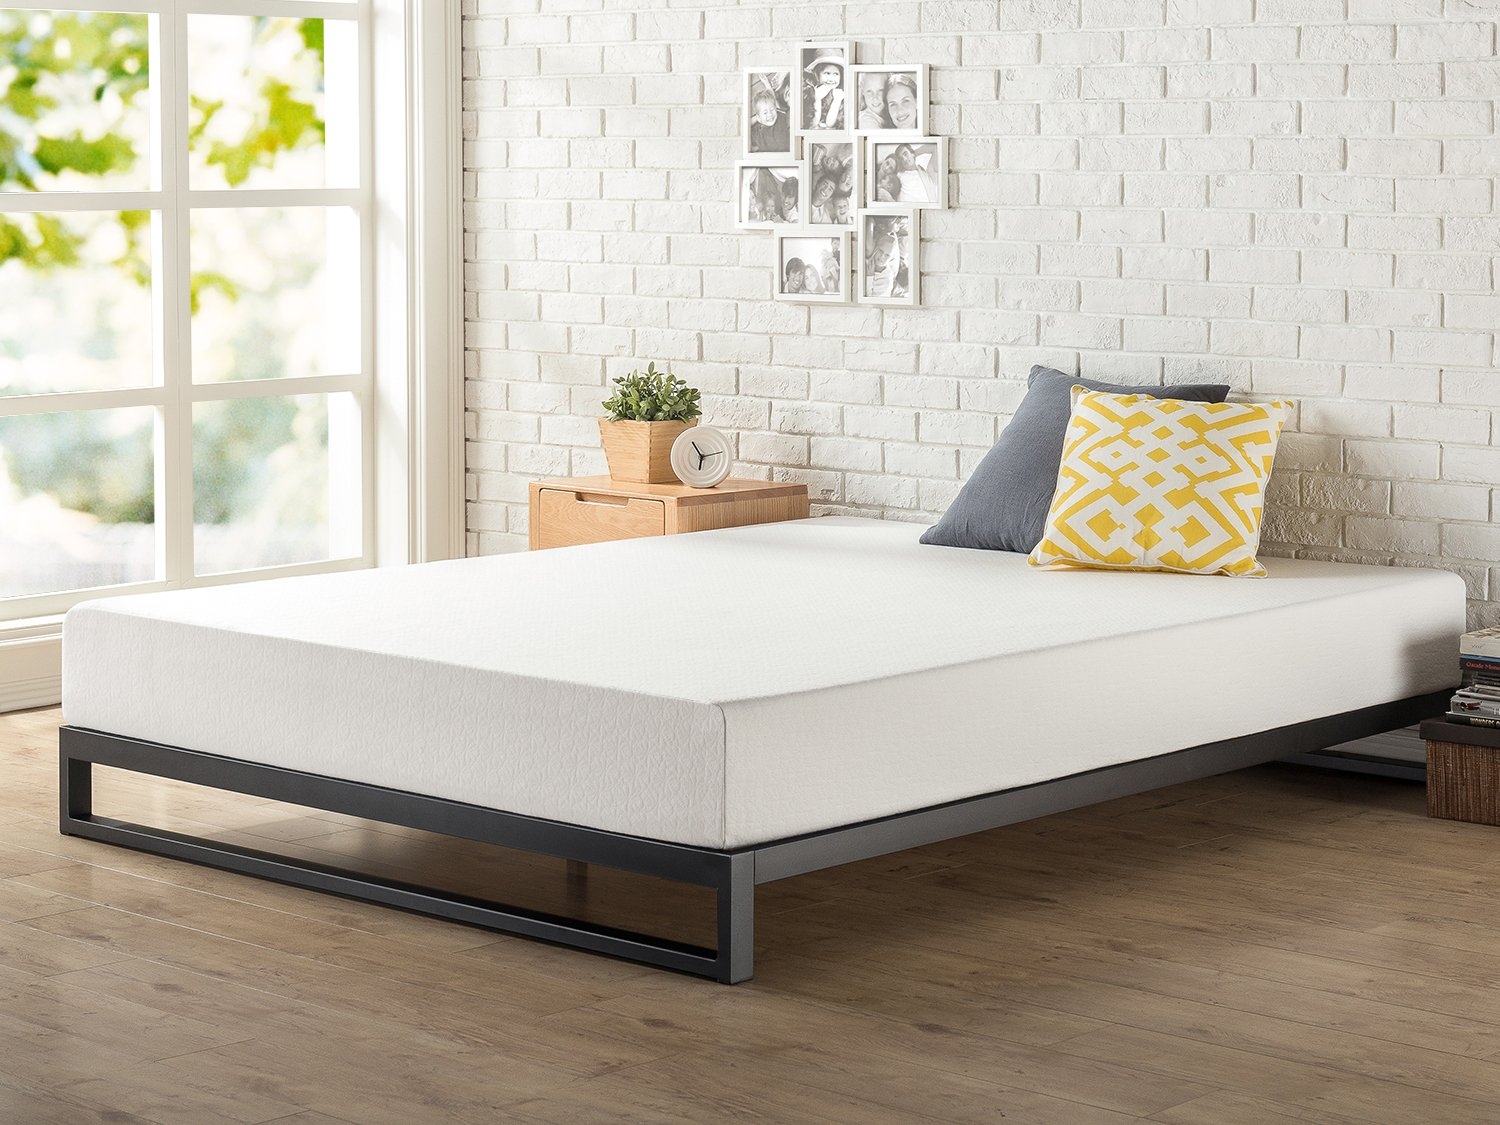 Low Profile Queen Bed Frames Visualhunt, Low Profile Queen Bed Frame